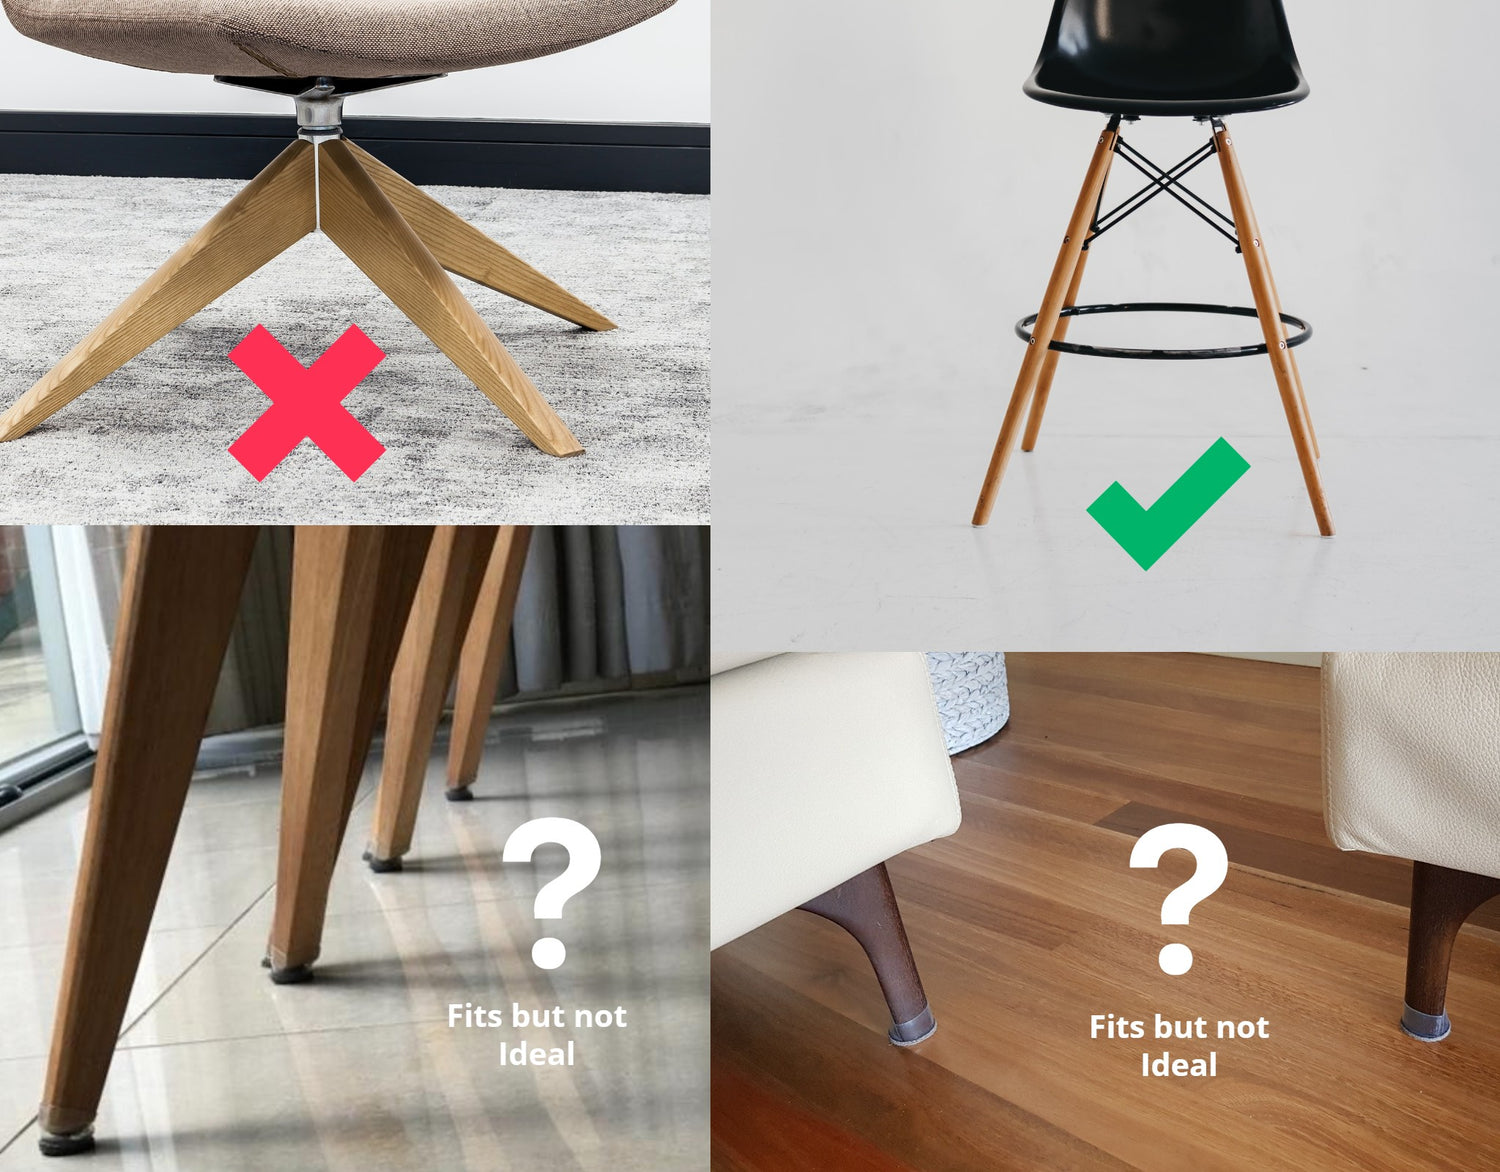 Where Can I Buy Chair Leg Protectors From? Exploring the Best Options for Floor Protection